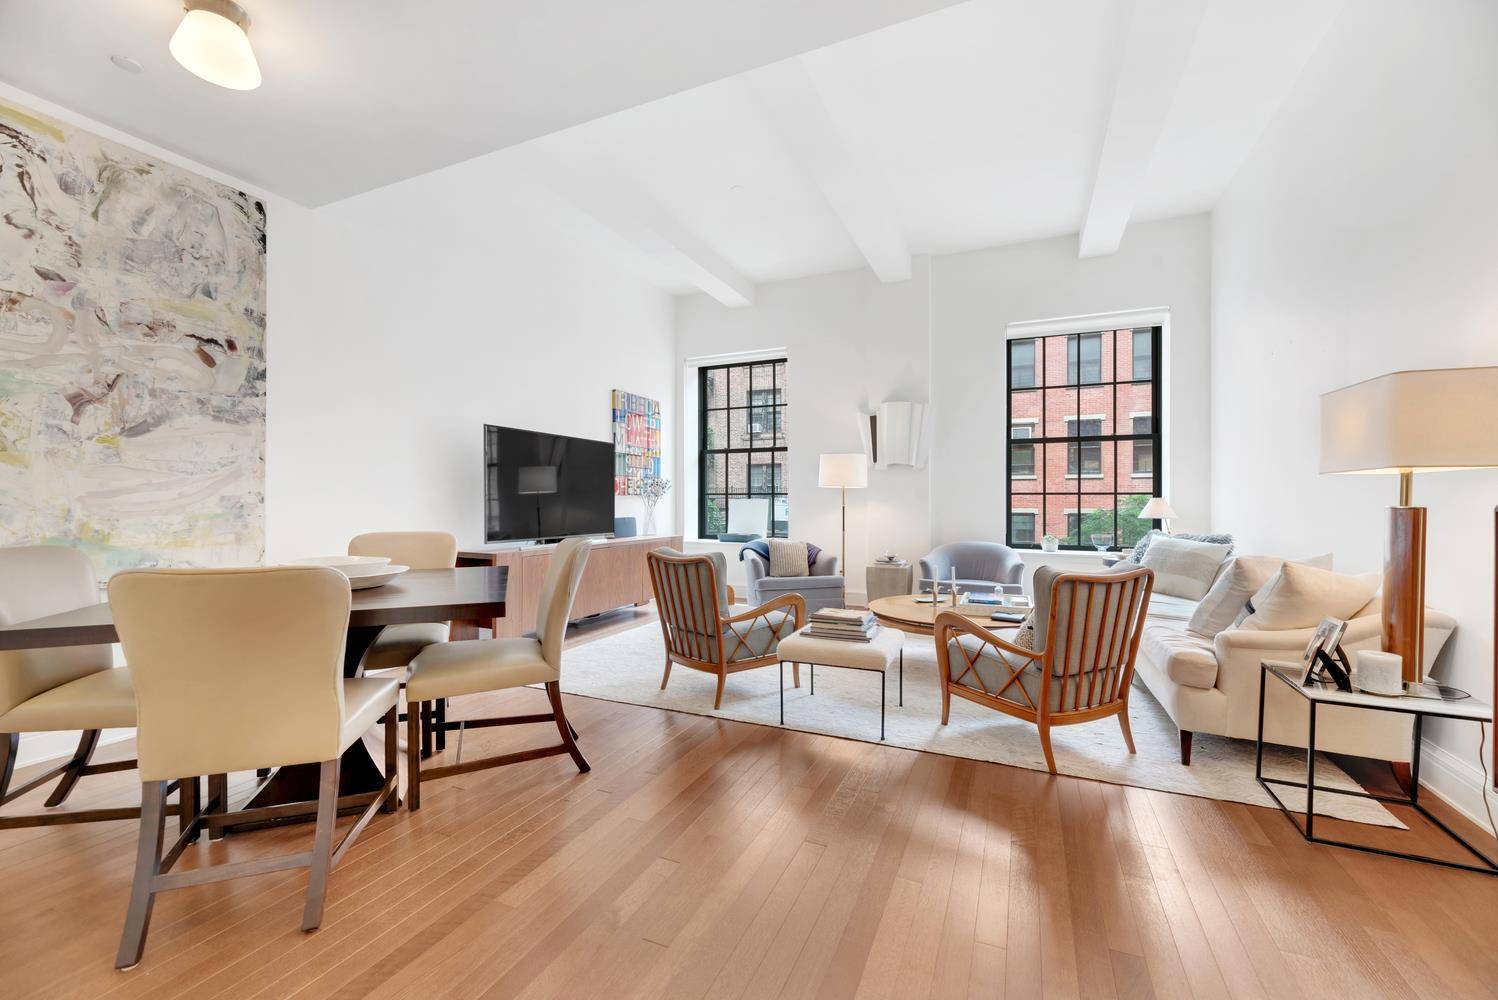 Nestled in the heart of the West Village and located in The Greenwich Lane Condominium this loft like 1, 535 square feet, 2 bedroom 2 bath residence is simply stunning.